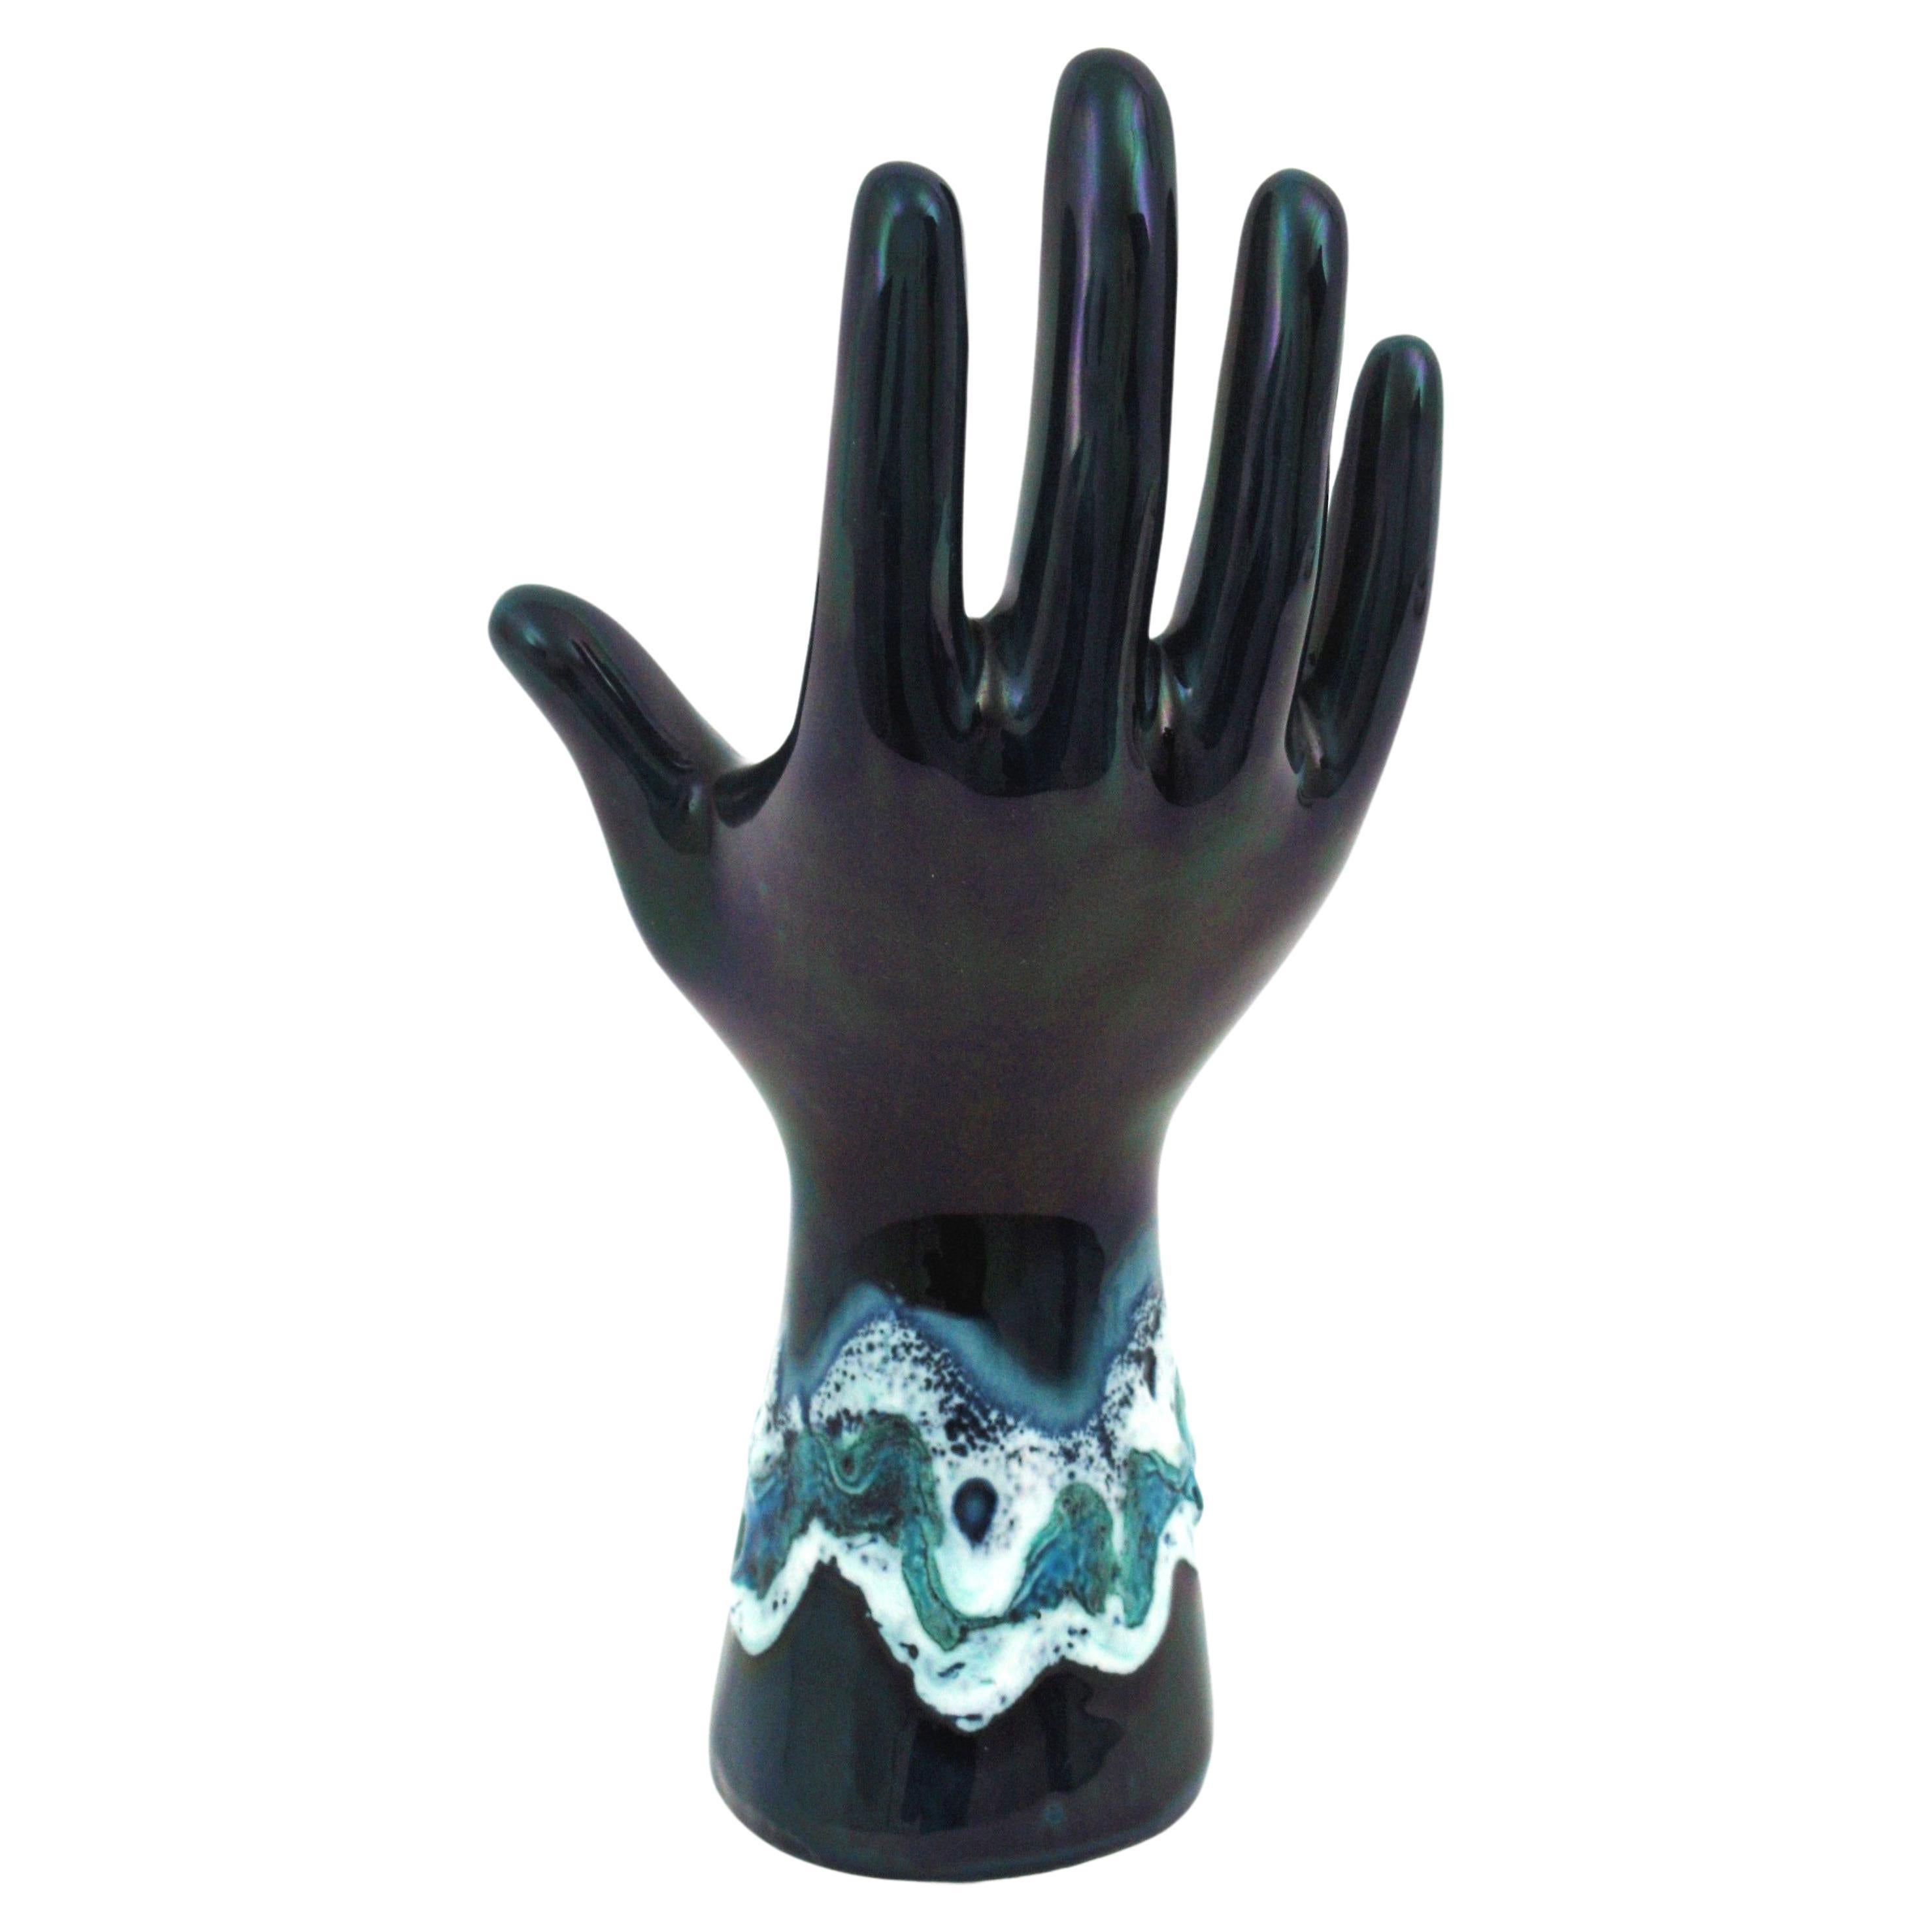 Vallauris Majolica Blue Ceramic Hand Shaped Vase / Rings Stand For Sale